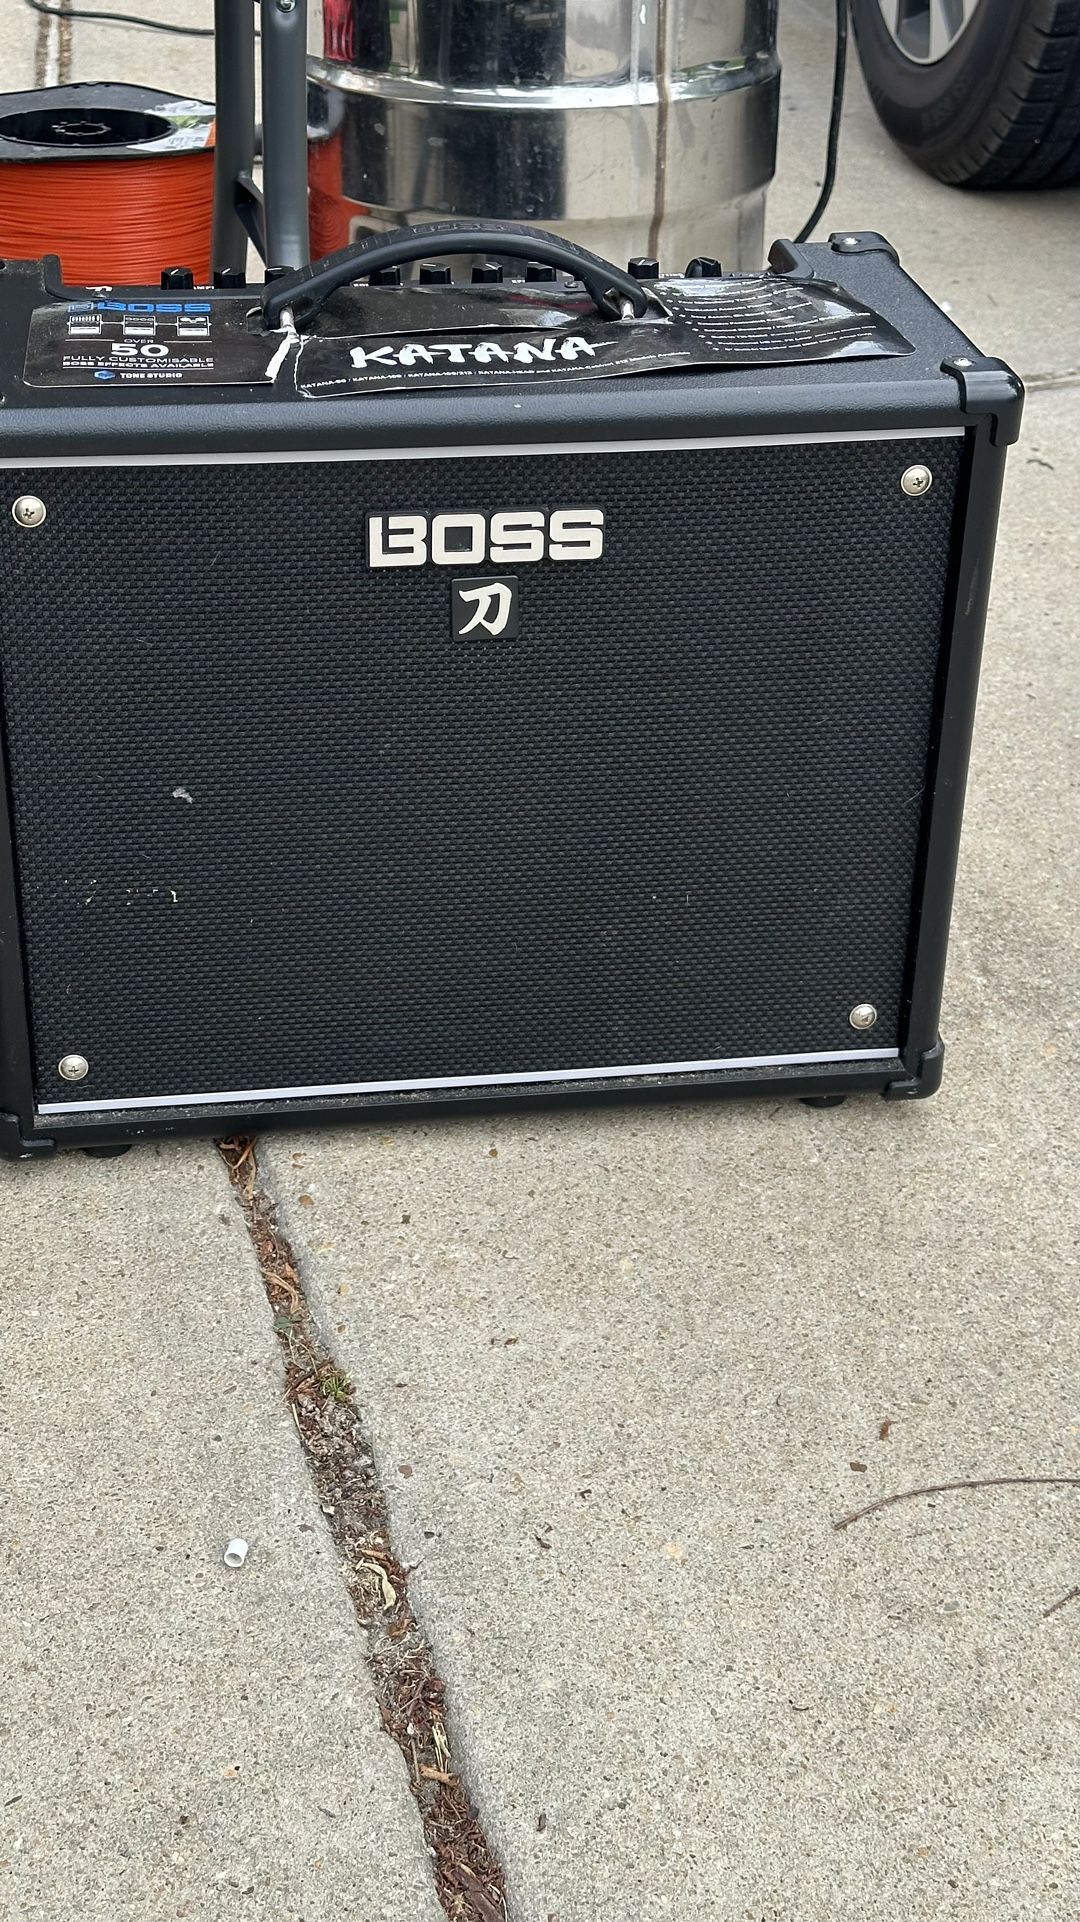 Amps - Must Go - MAKE and OFFER